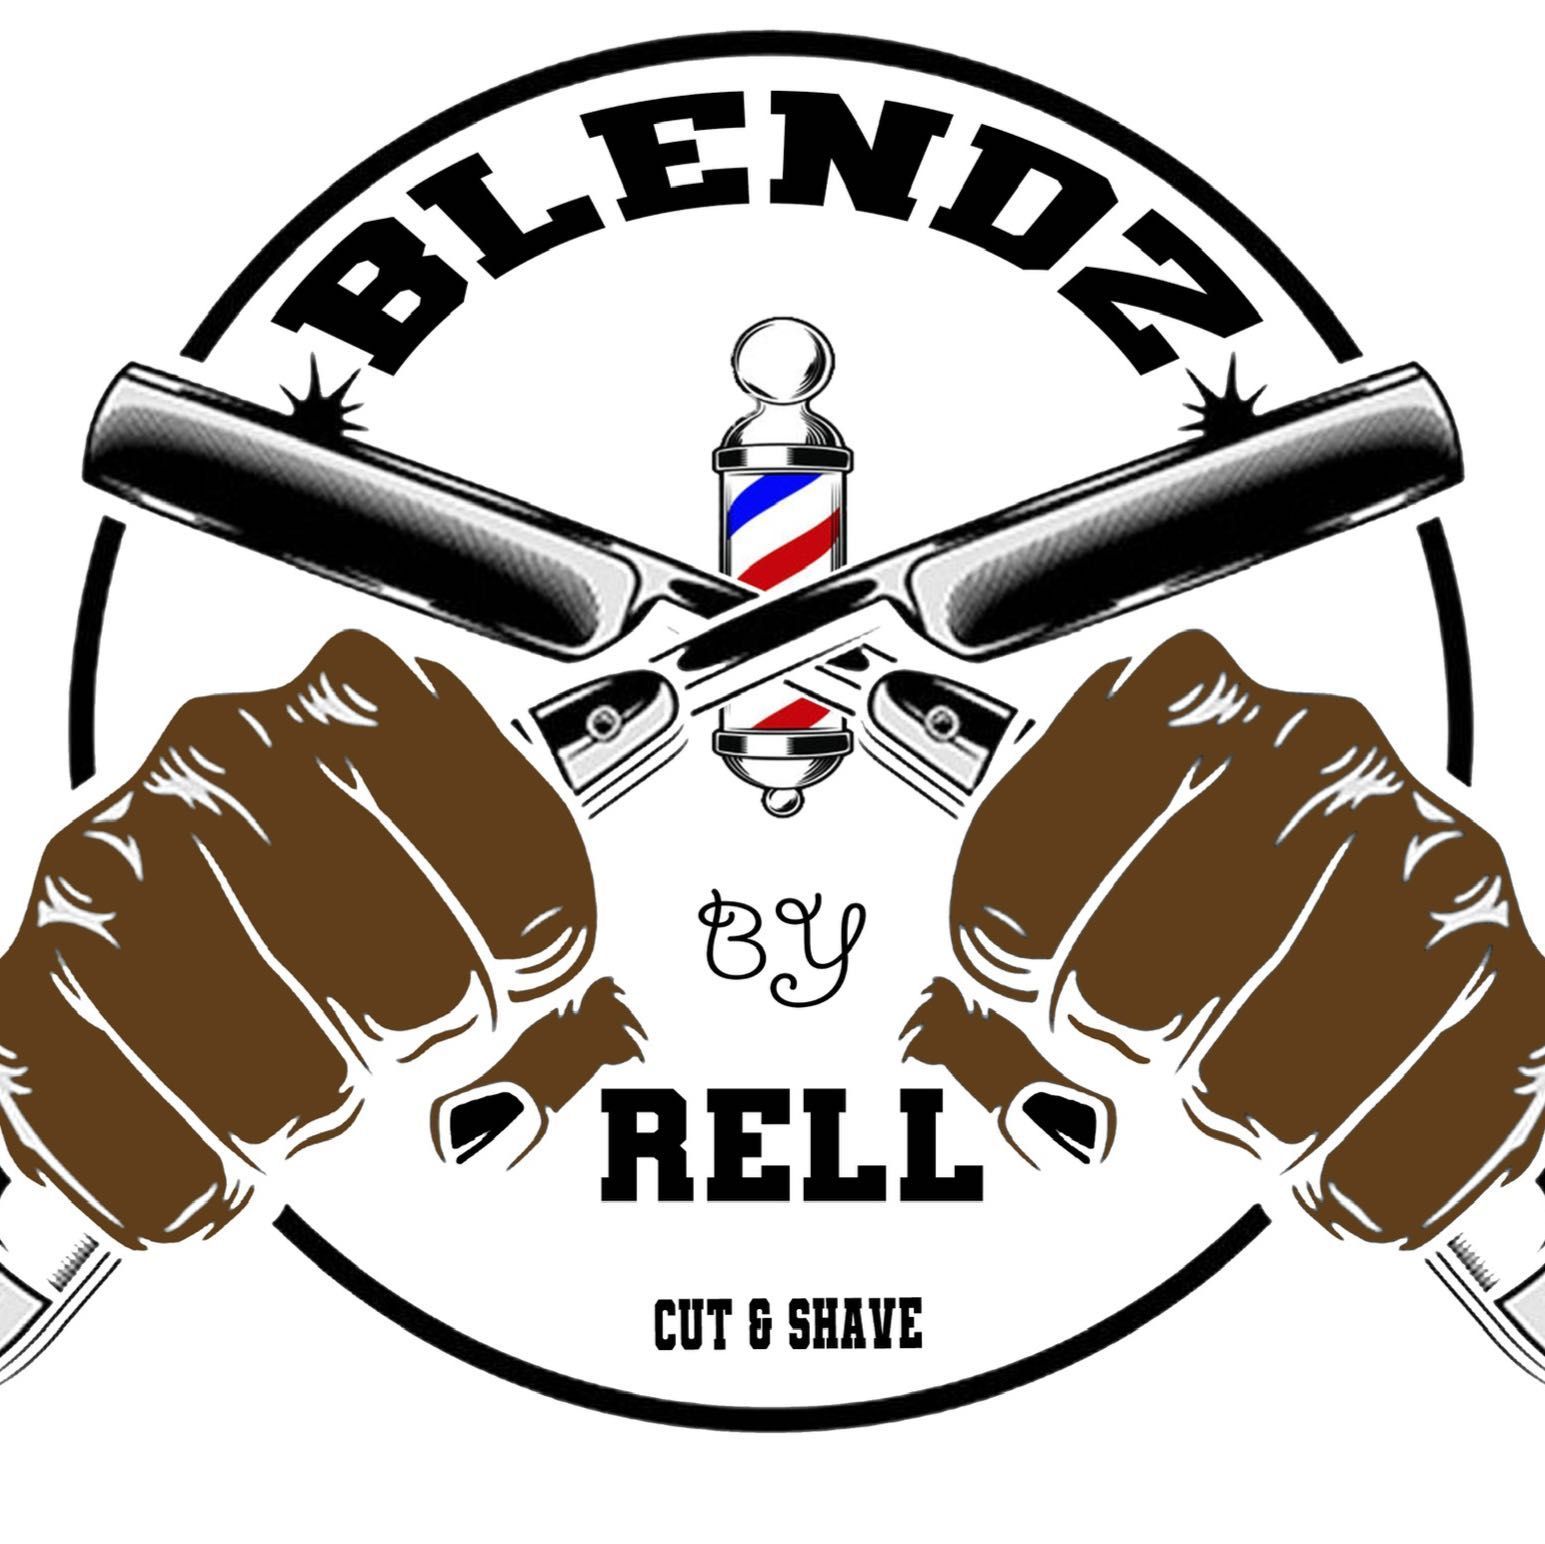 Blendz By Rell, 5705 Marconi Ave, Carmichael, 95608